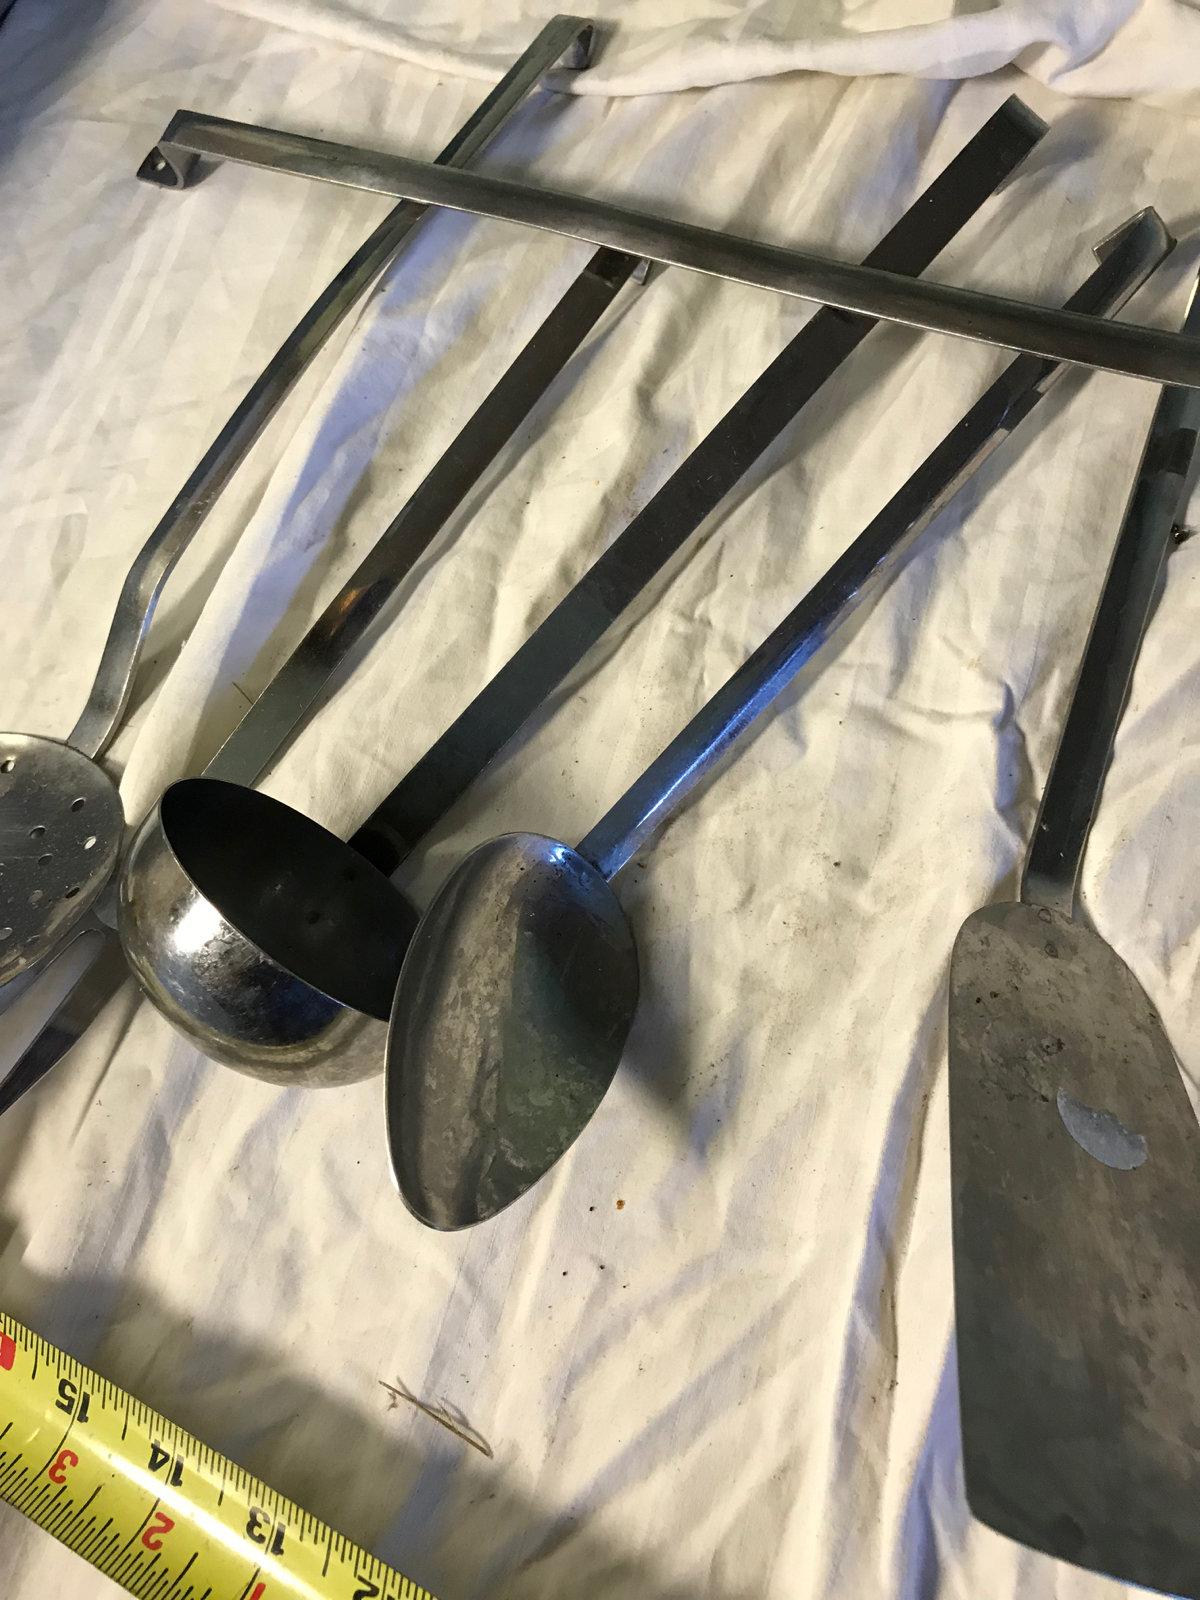 Stainless Steel utensil set, with wall hung rack